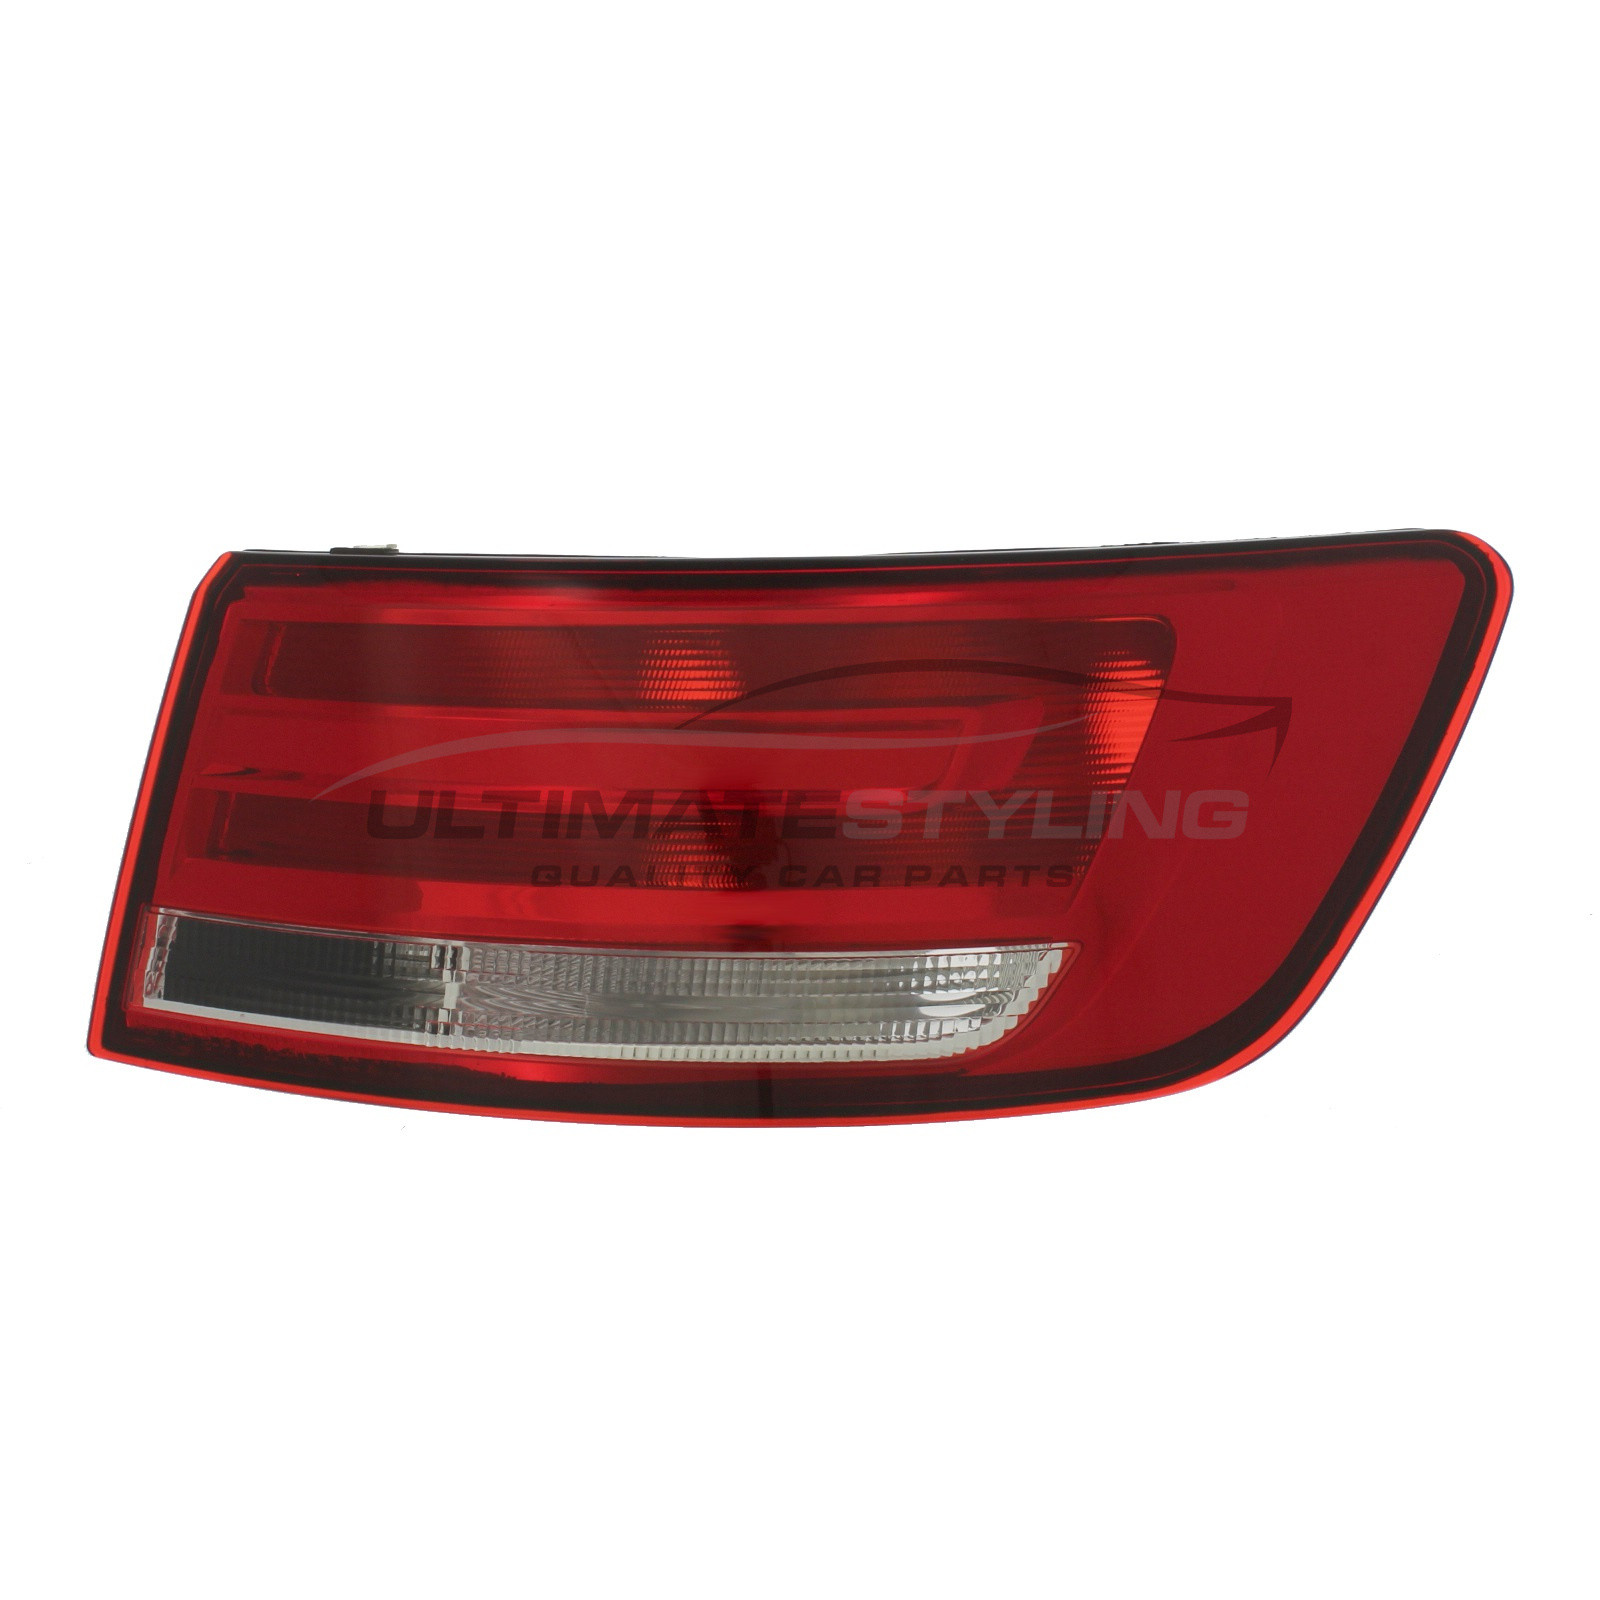 Audi A4 2015-2019 Non-LED Outer (Wing) Rear Light / Tail Light Excluding Bulb Holder Drivers Side (RH)